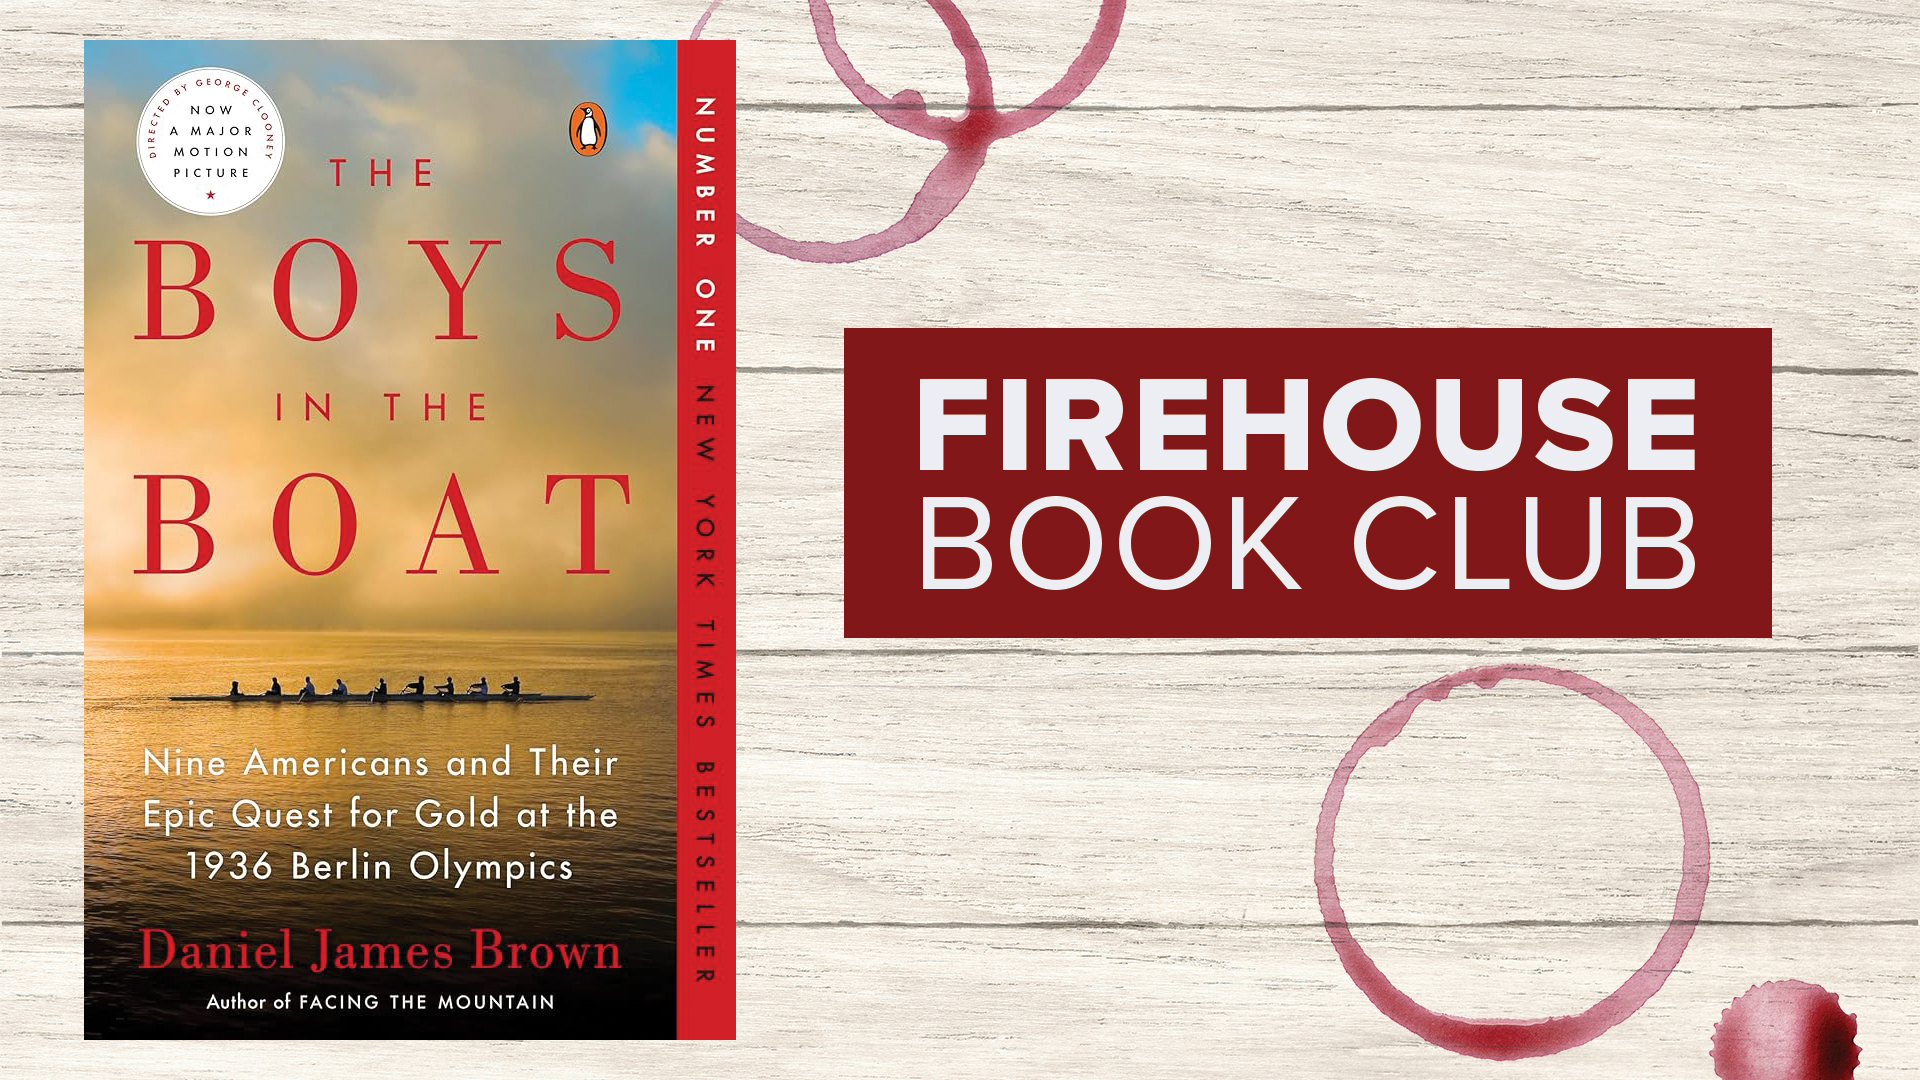 Firehouse Book Club in Rapid City SD - The Boys in the Boat